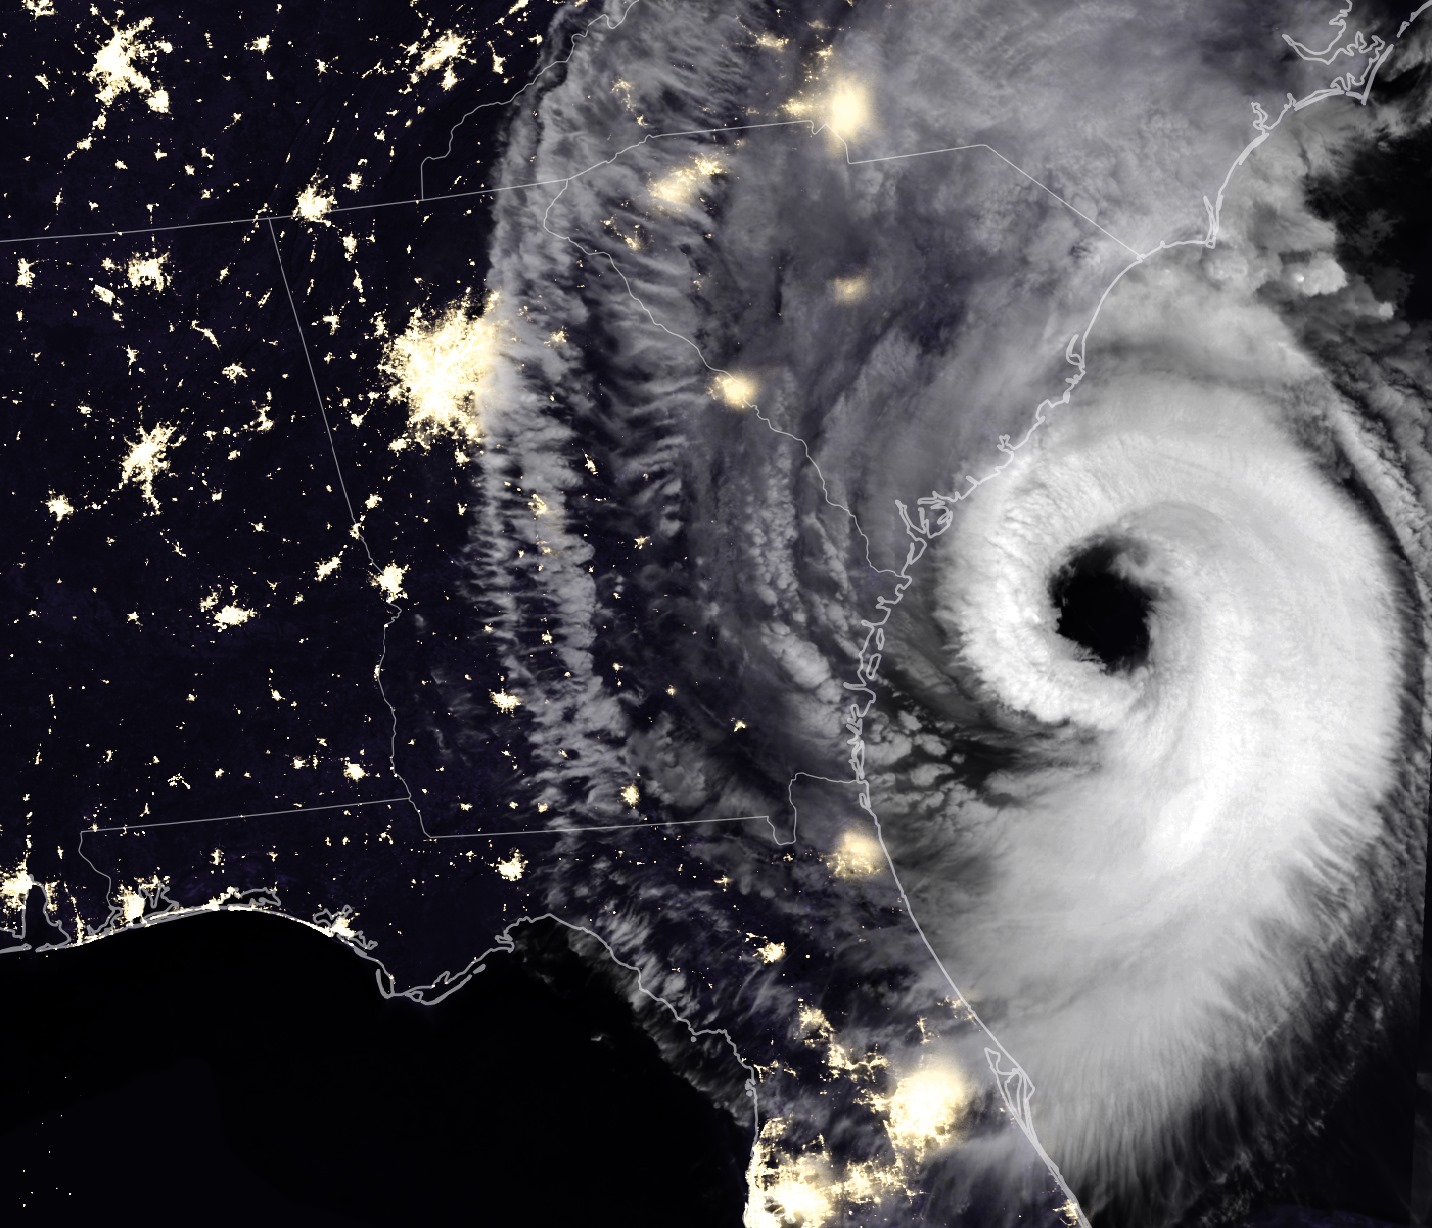 On a satellite map of the southeastern U.S. coast at night, city lights glow against a blue back drop on the left, while the huge swirling white clouds of Hurricane Dorian loom on the right, near the coast of South Carolina.